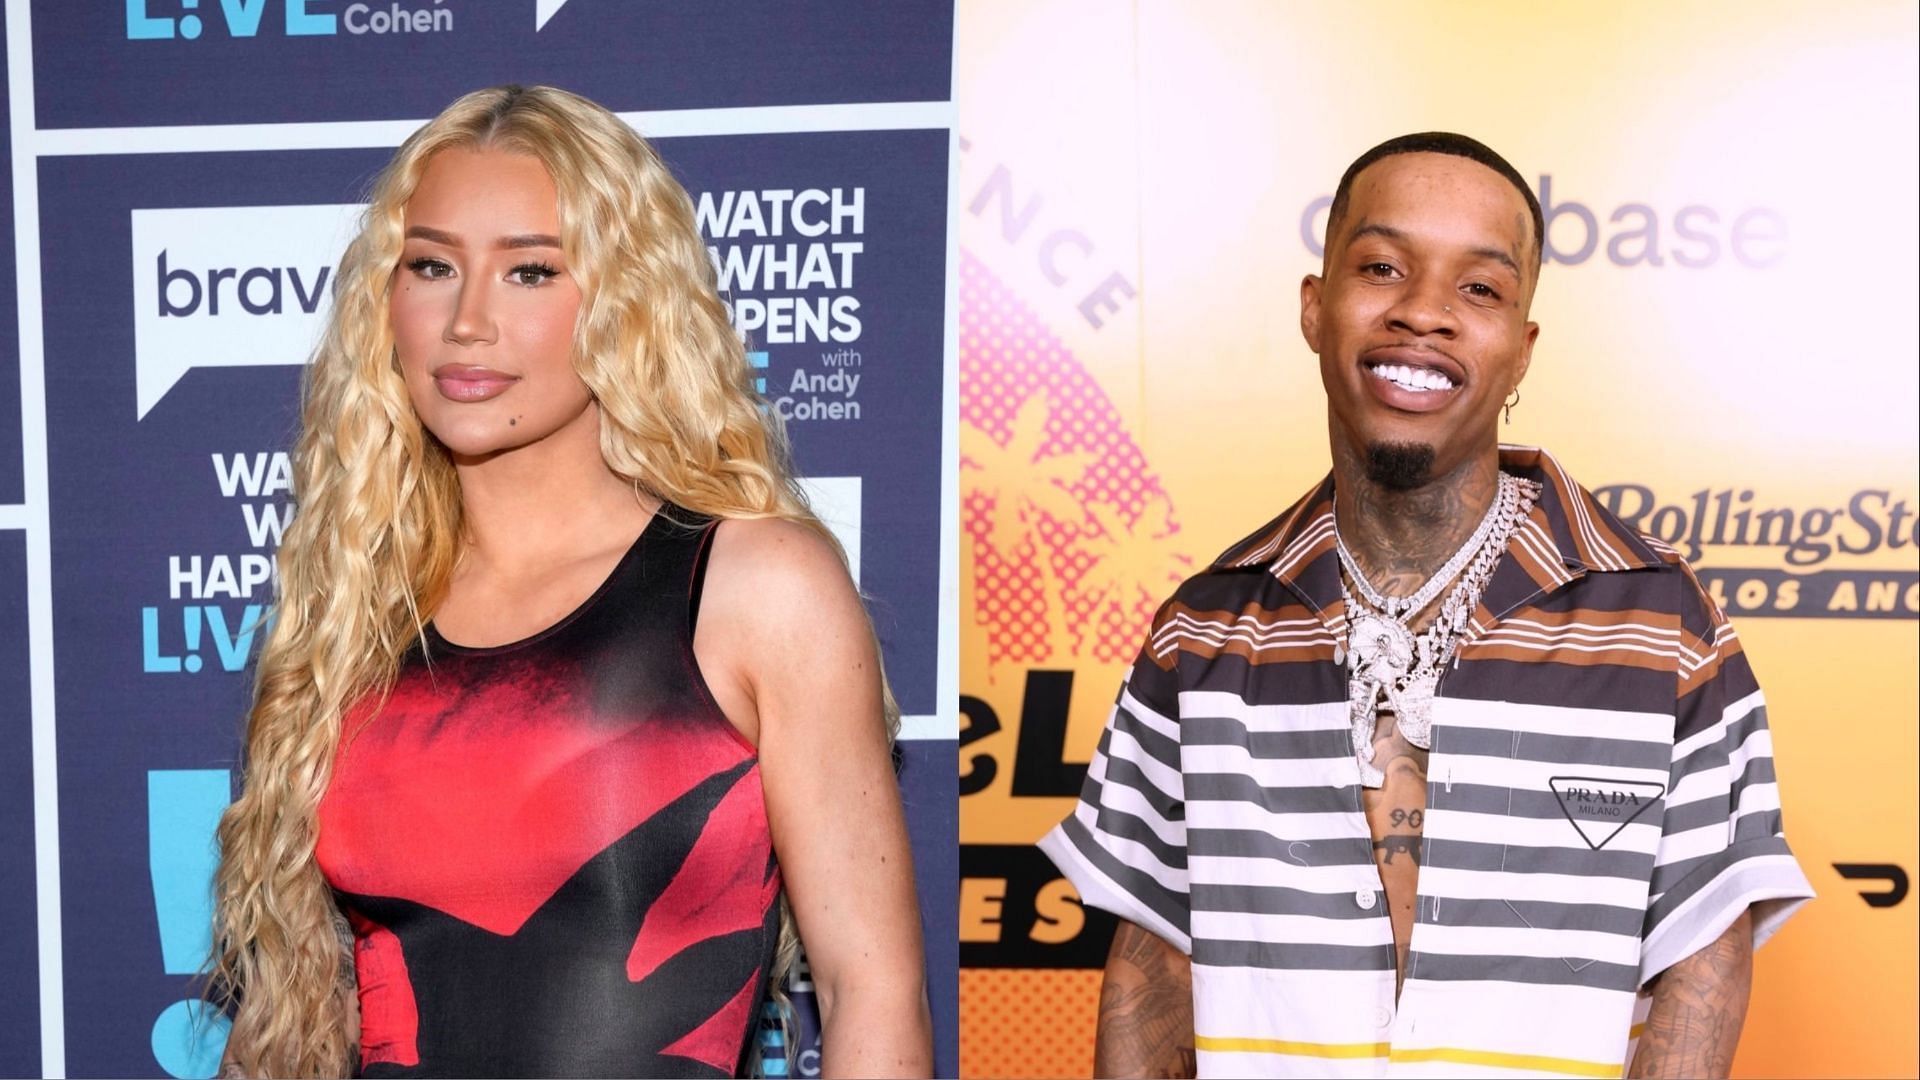 Iggy Azalea is being criticised for the later she wrote in defence of Tory Lanez. (Images via Getty Images)